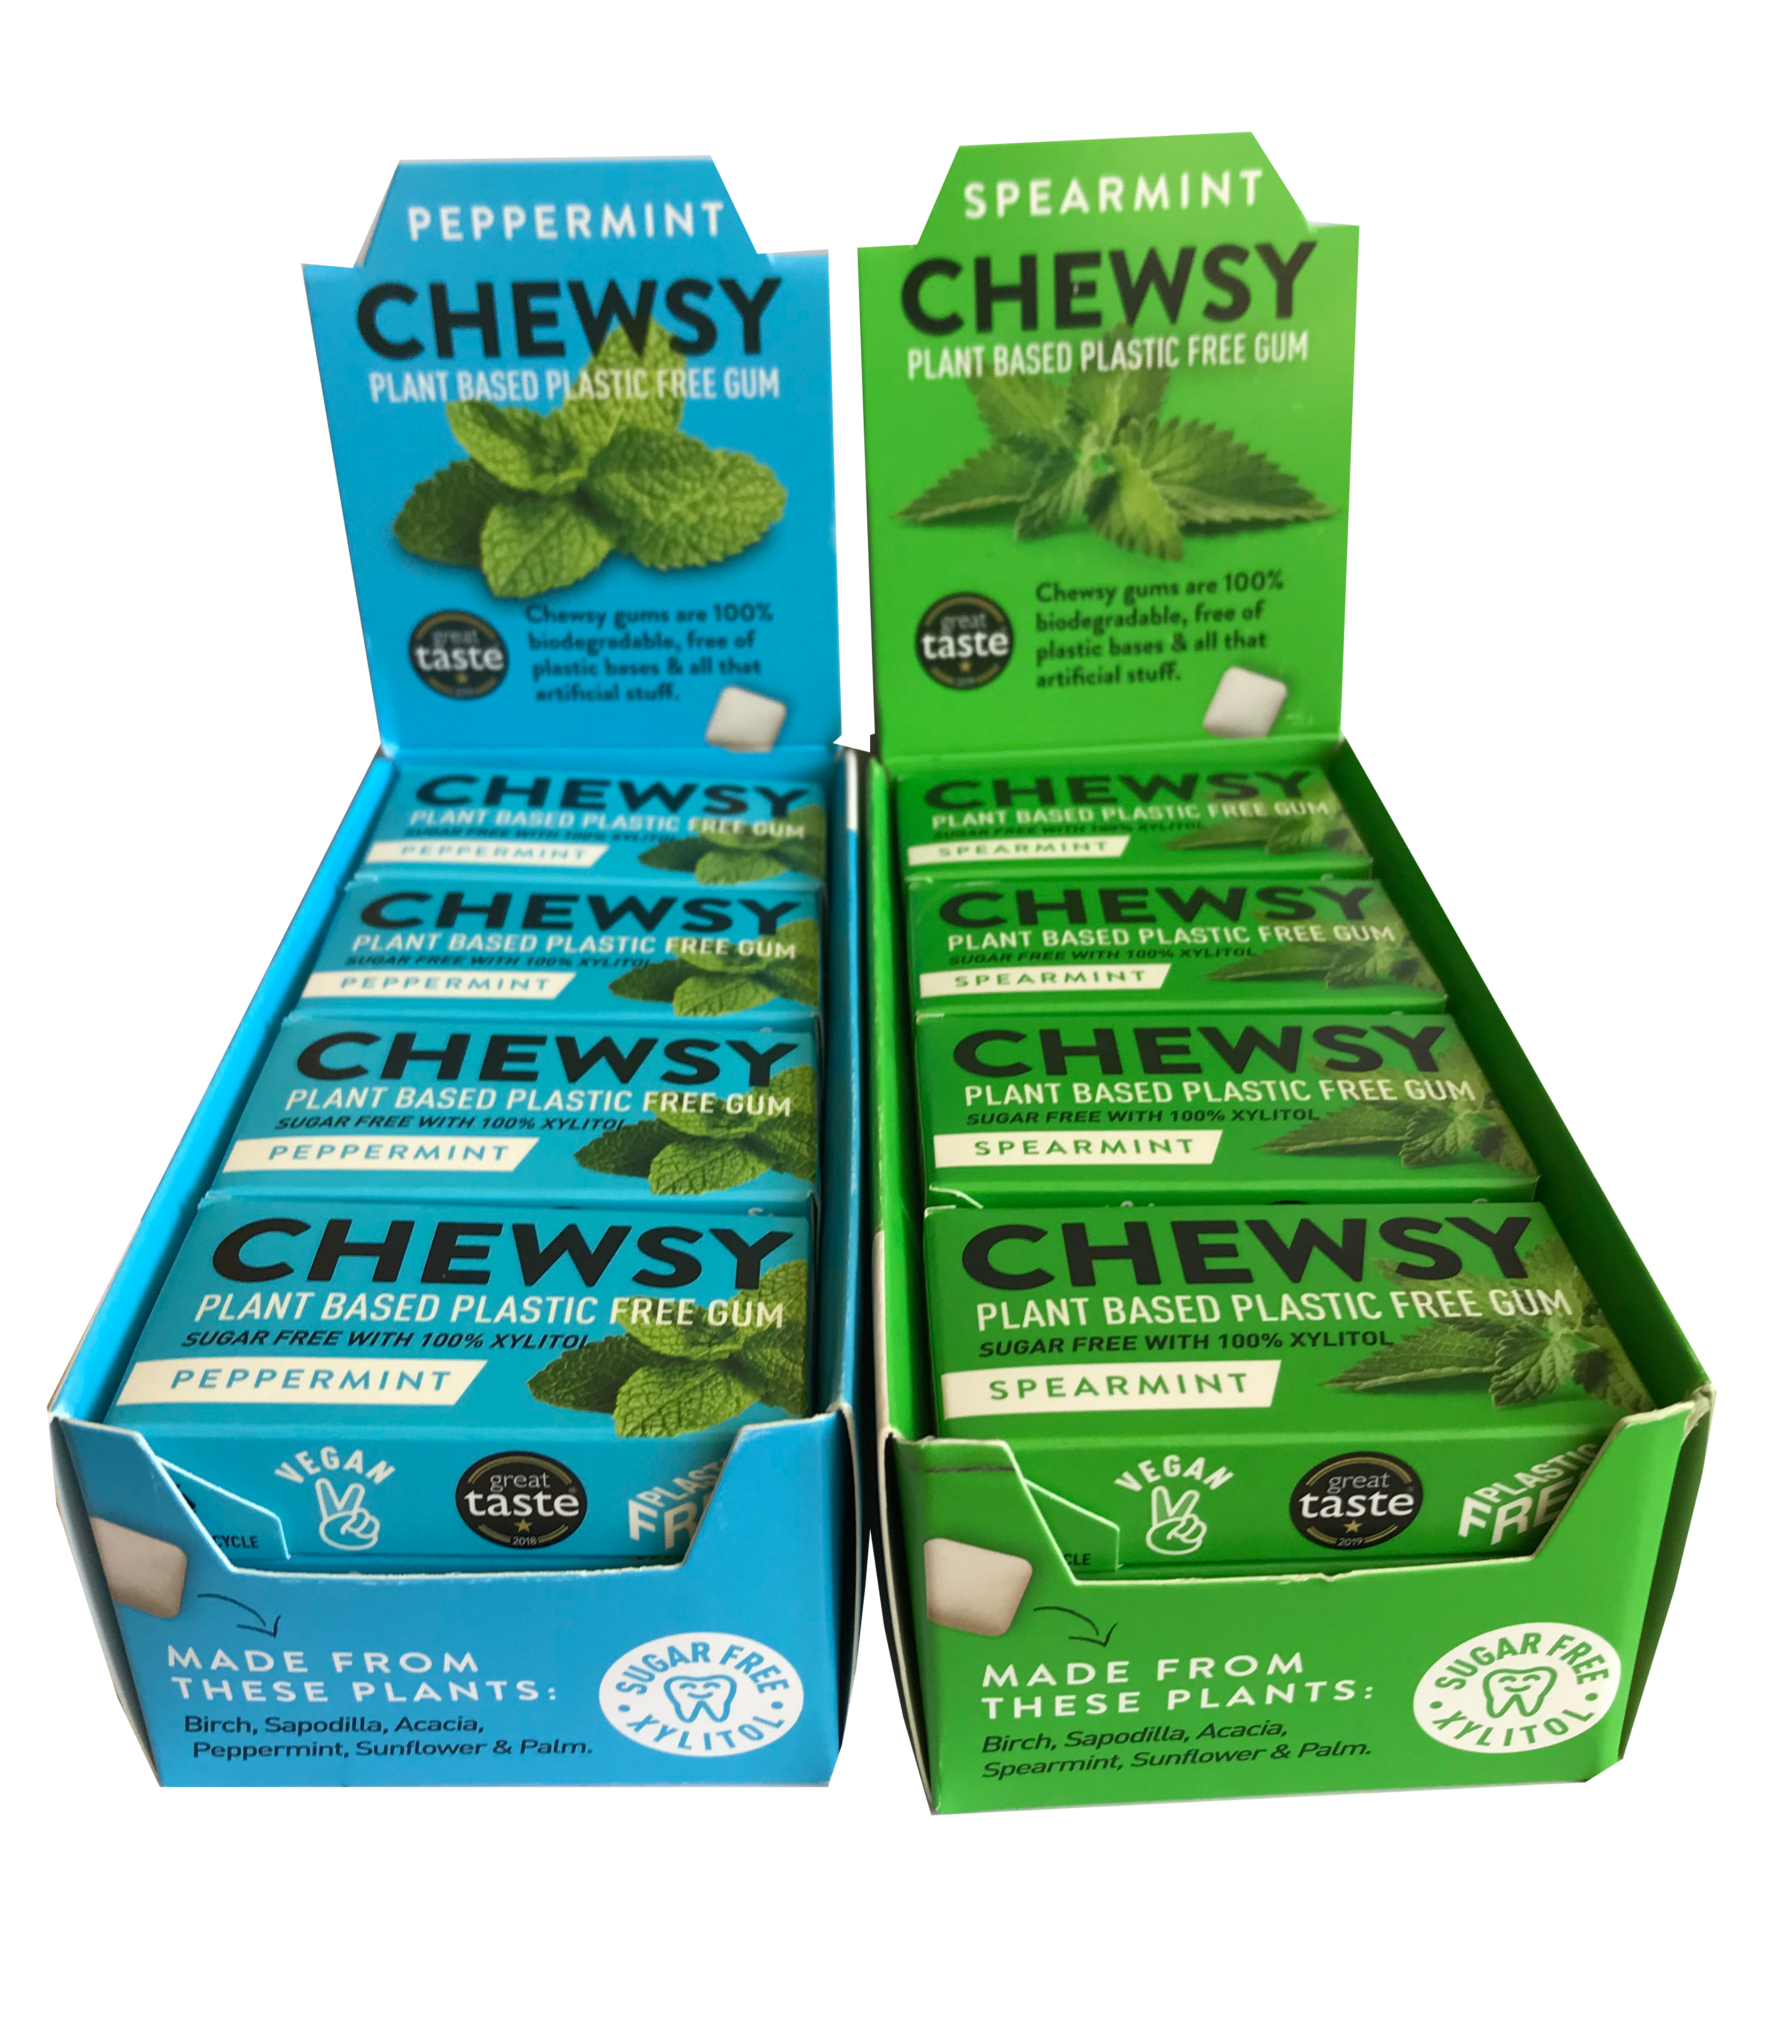 two cardboard display boxes one in bright green labelled chewsy spearmint, one bright blue labelled chewsy peppermint. Display boxes contain box packets of gum in bright green spearmint or bright blue peppermint